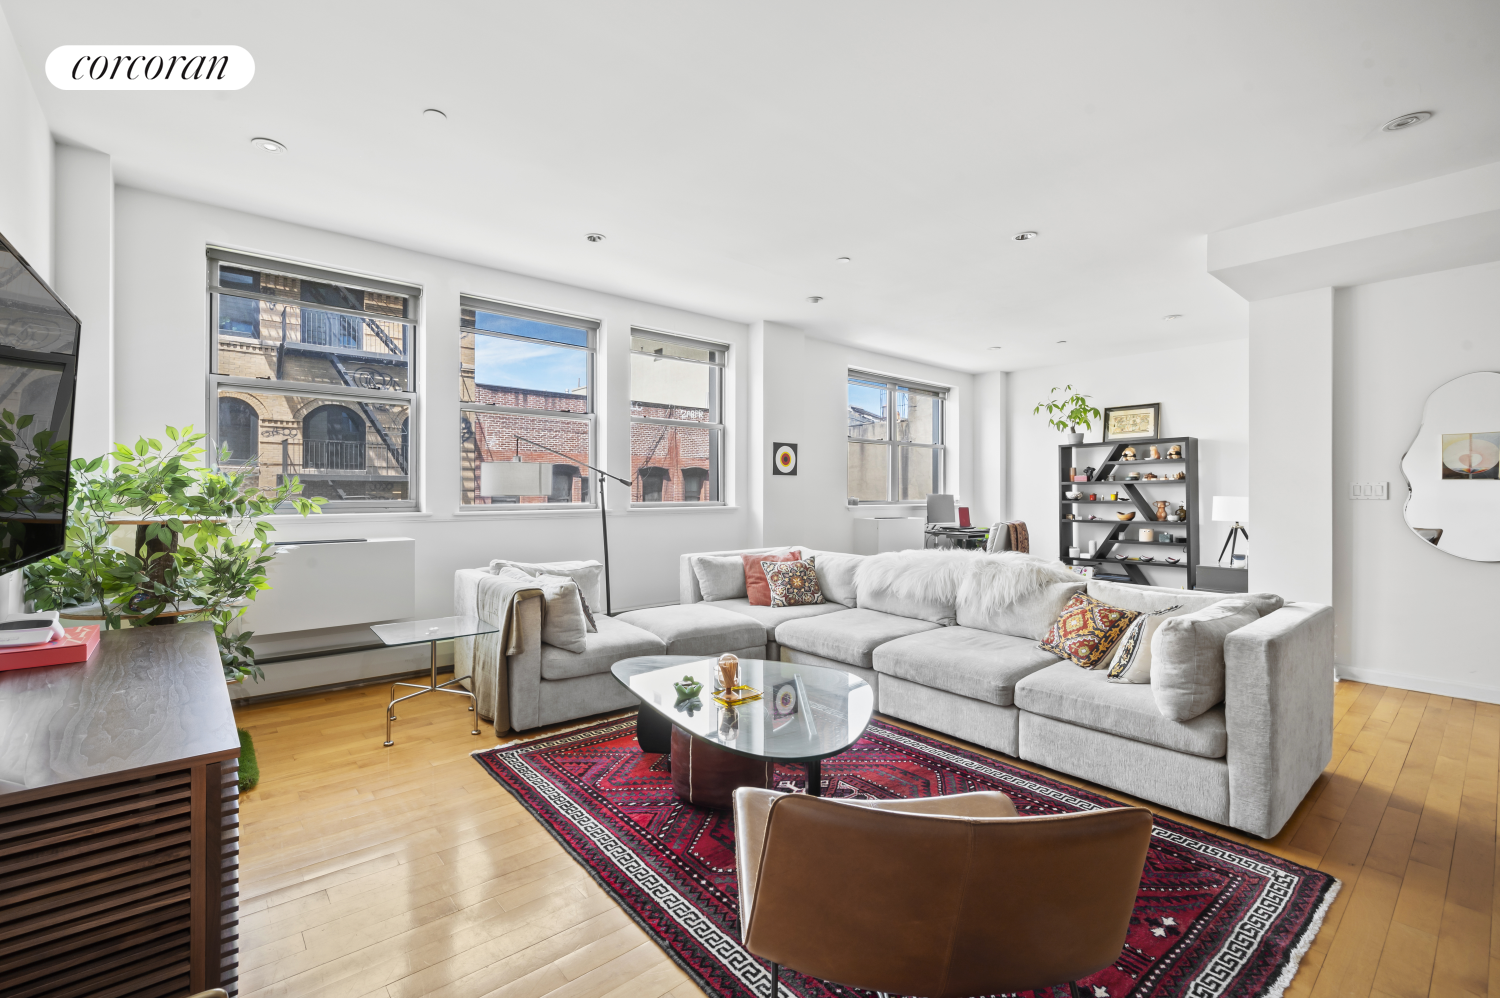 50 Orchard Street 5A, Lower East Side, Downtown, NYC - 2 Bedrooms  
2 Bathrooms  
4 Rooms - 